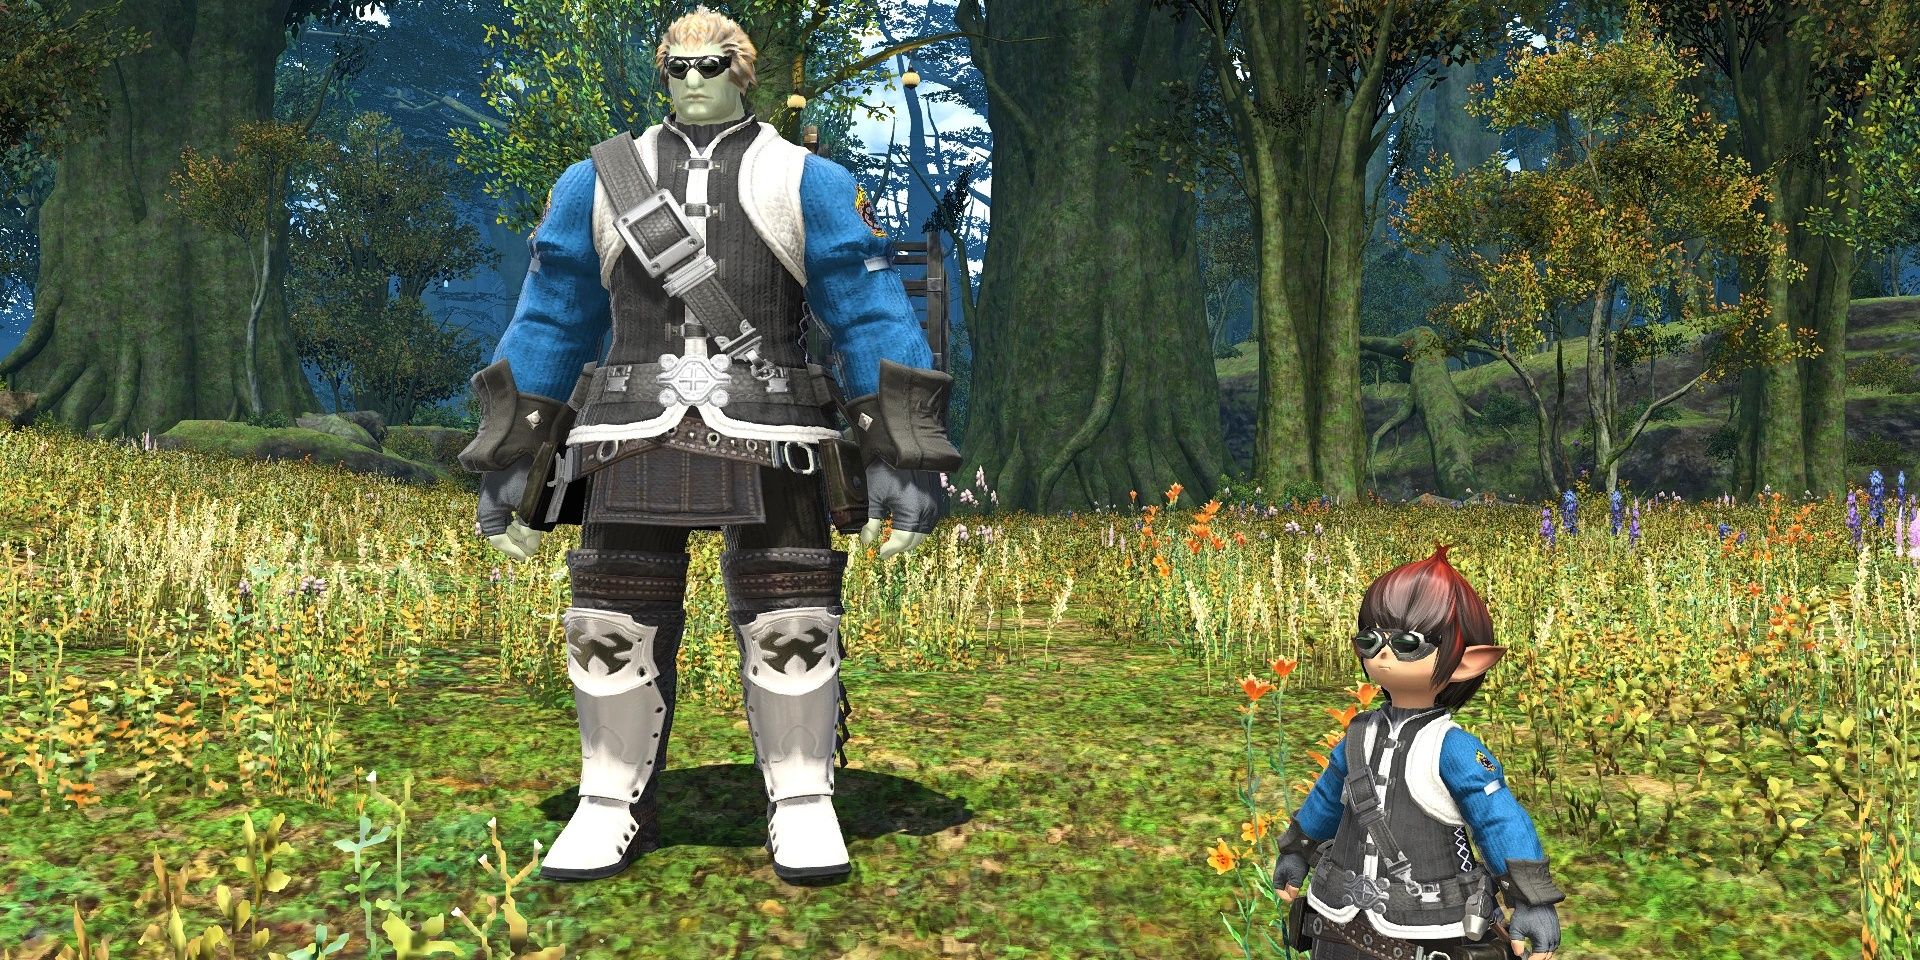 Sea Wolf Roegadyn Biggs (left) and Lalafell Wedge on the right, skilled engineers under the employ of Cid